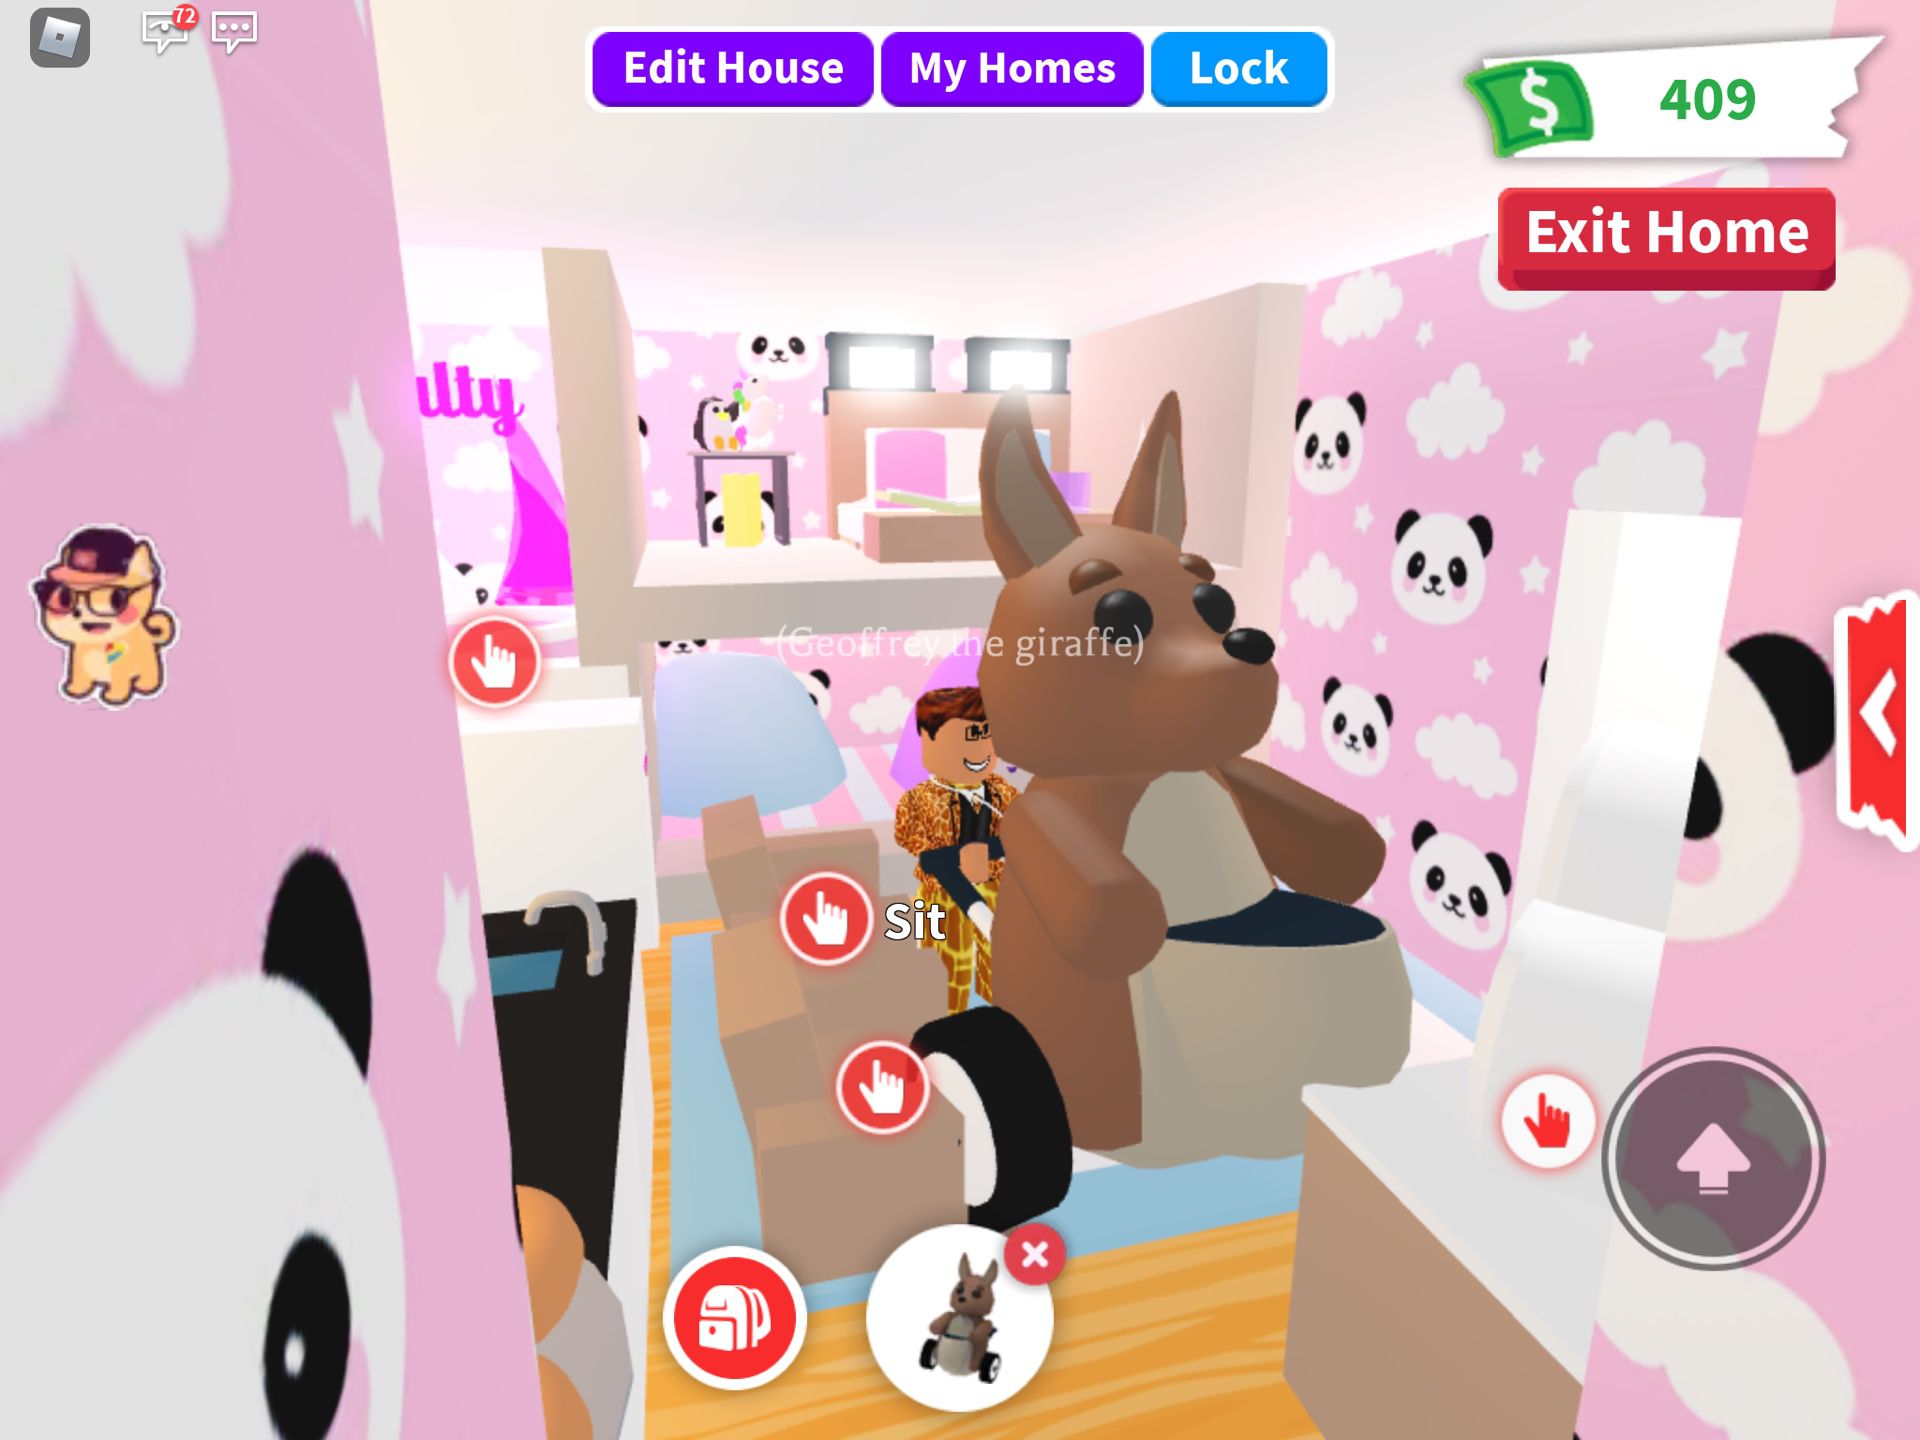 Trading Roblox Adopt Me Kangaroo Stroller For Sale In Cypress Ca Offerup - roblox trading adopt me